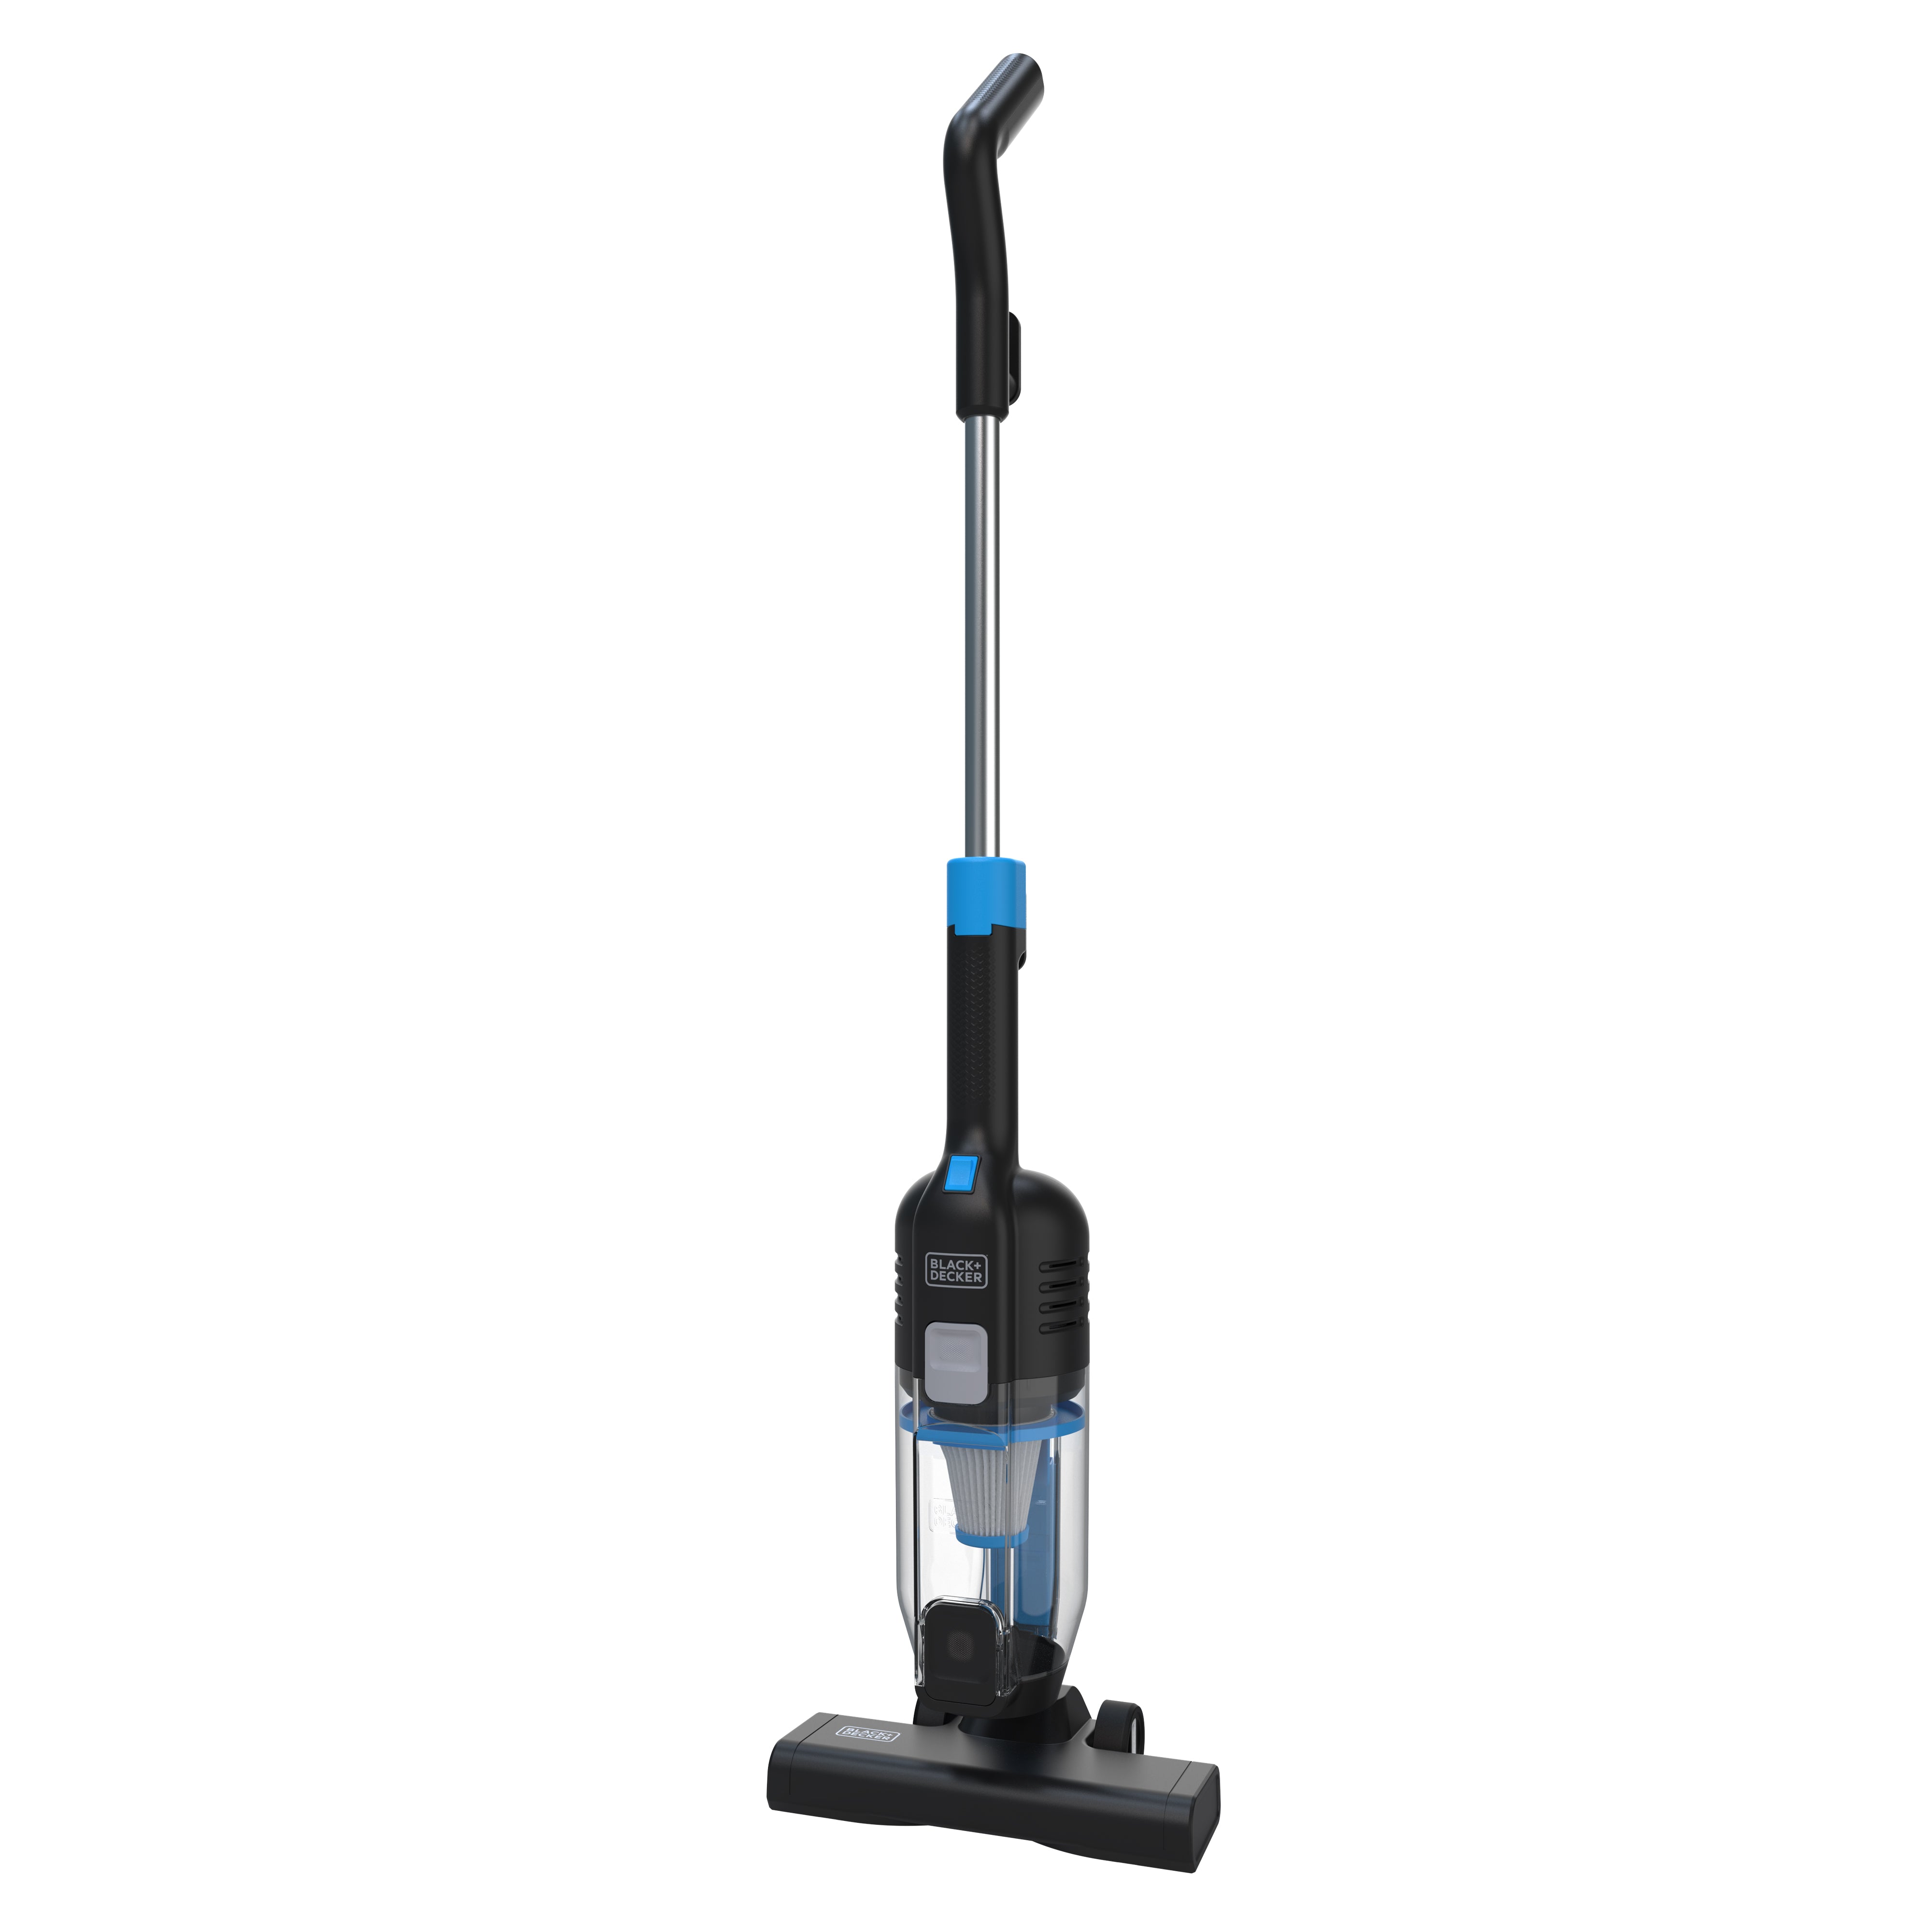 BLACK+DECKER's new POWERSERIES stick vac now available